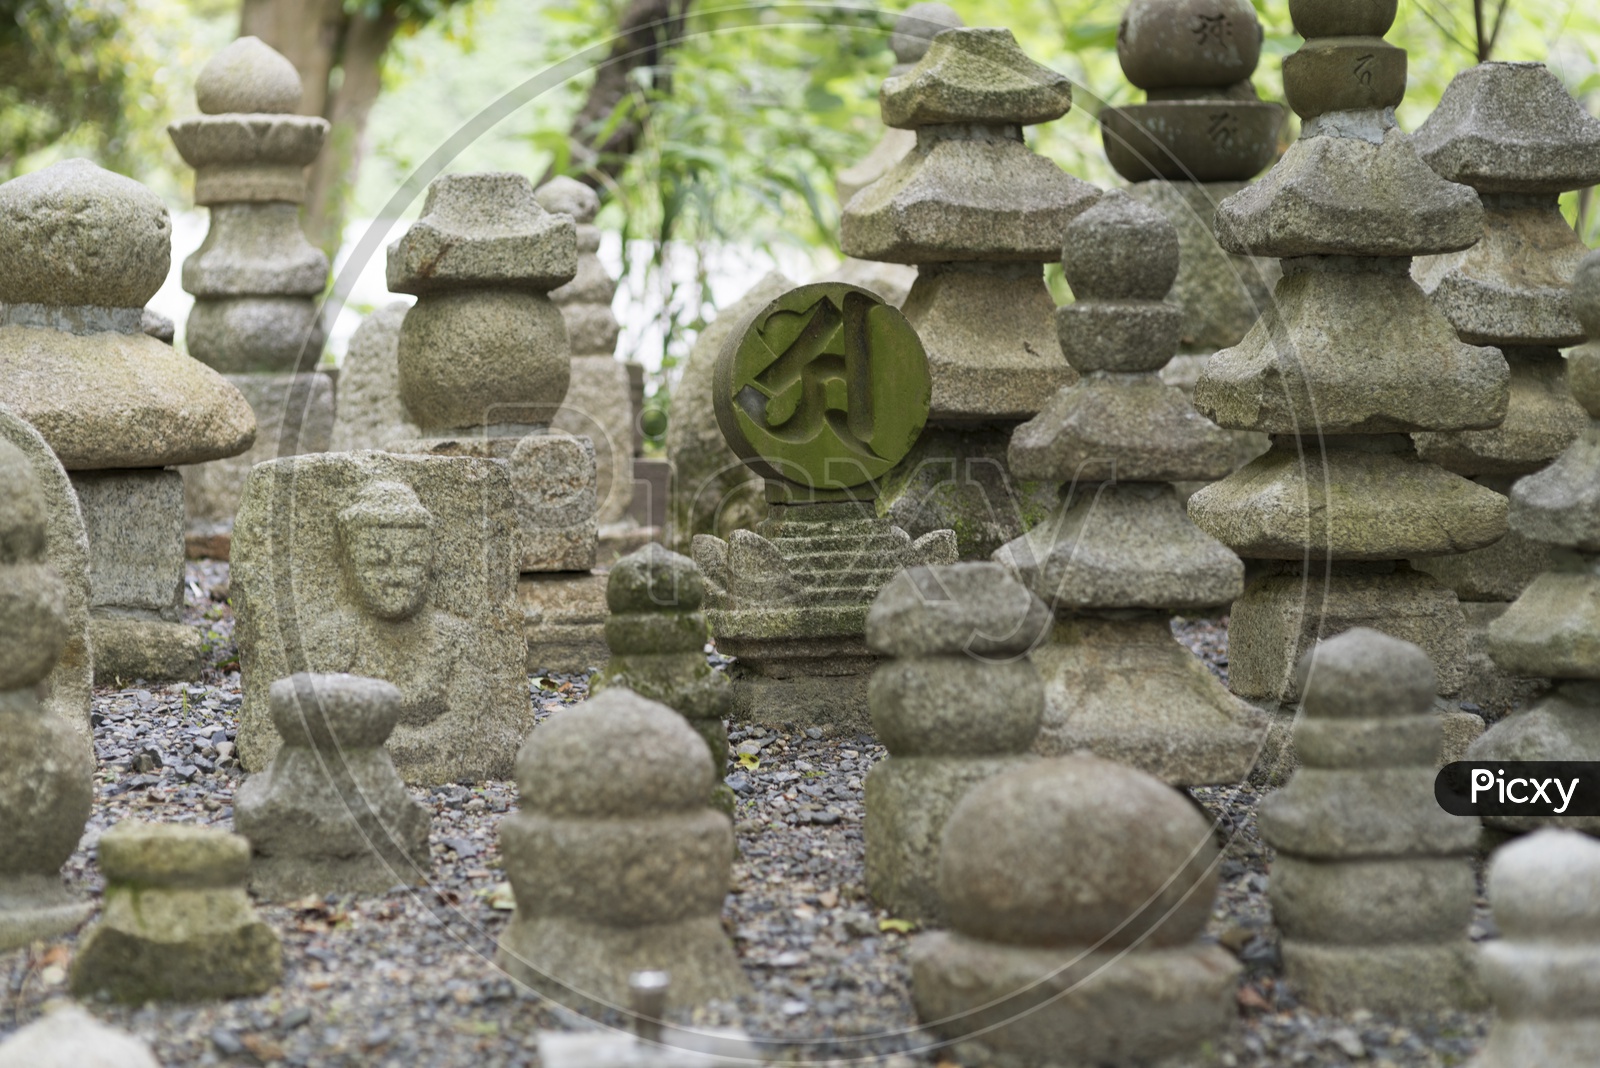 Buddhist stupas along the entrance to the Zuiganji Temple in Matsushima.